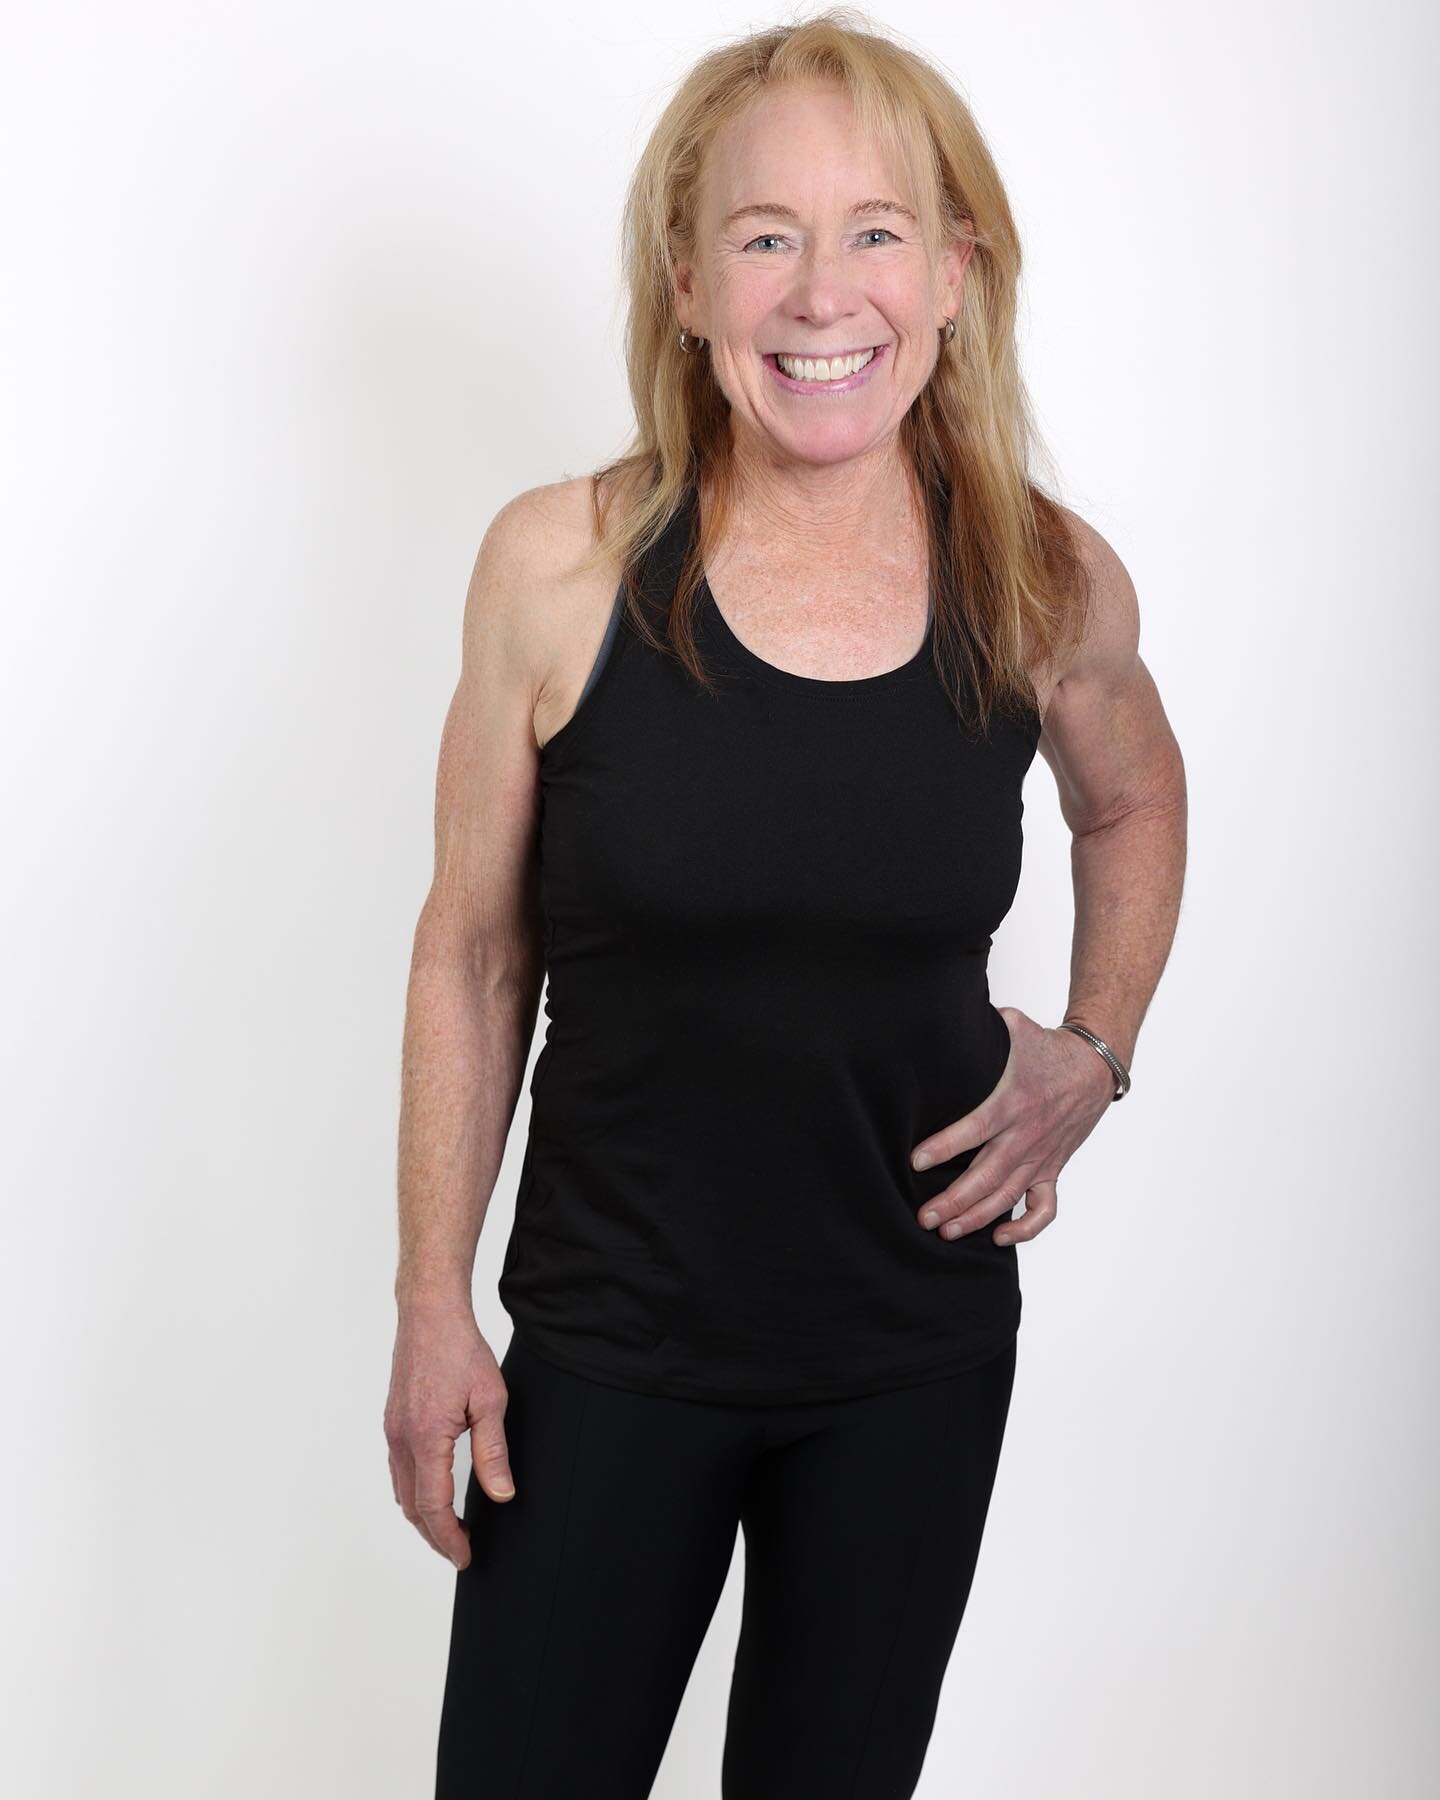 NEW CLASS with Laura Stern tomorrow Tuesday 9:30am!! 
45&rsquo; cycling + 15&rsquo; Abs/core (off the bike)
🚴🏻&zwj;♀️💪🏼

Laura is certified for indoor cycling through both Saris and Stages and has over 20 years of teaching experience at local (Me